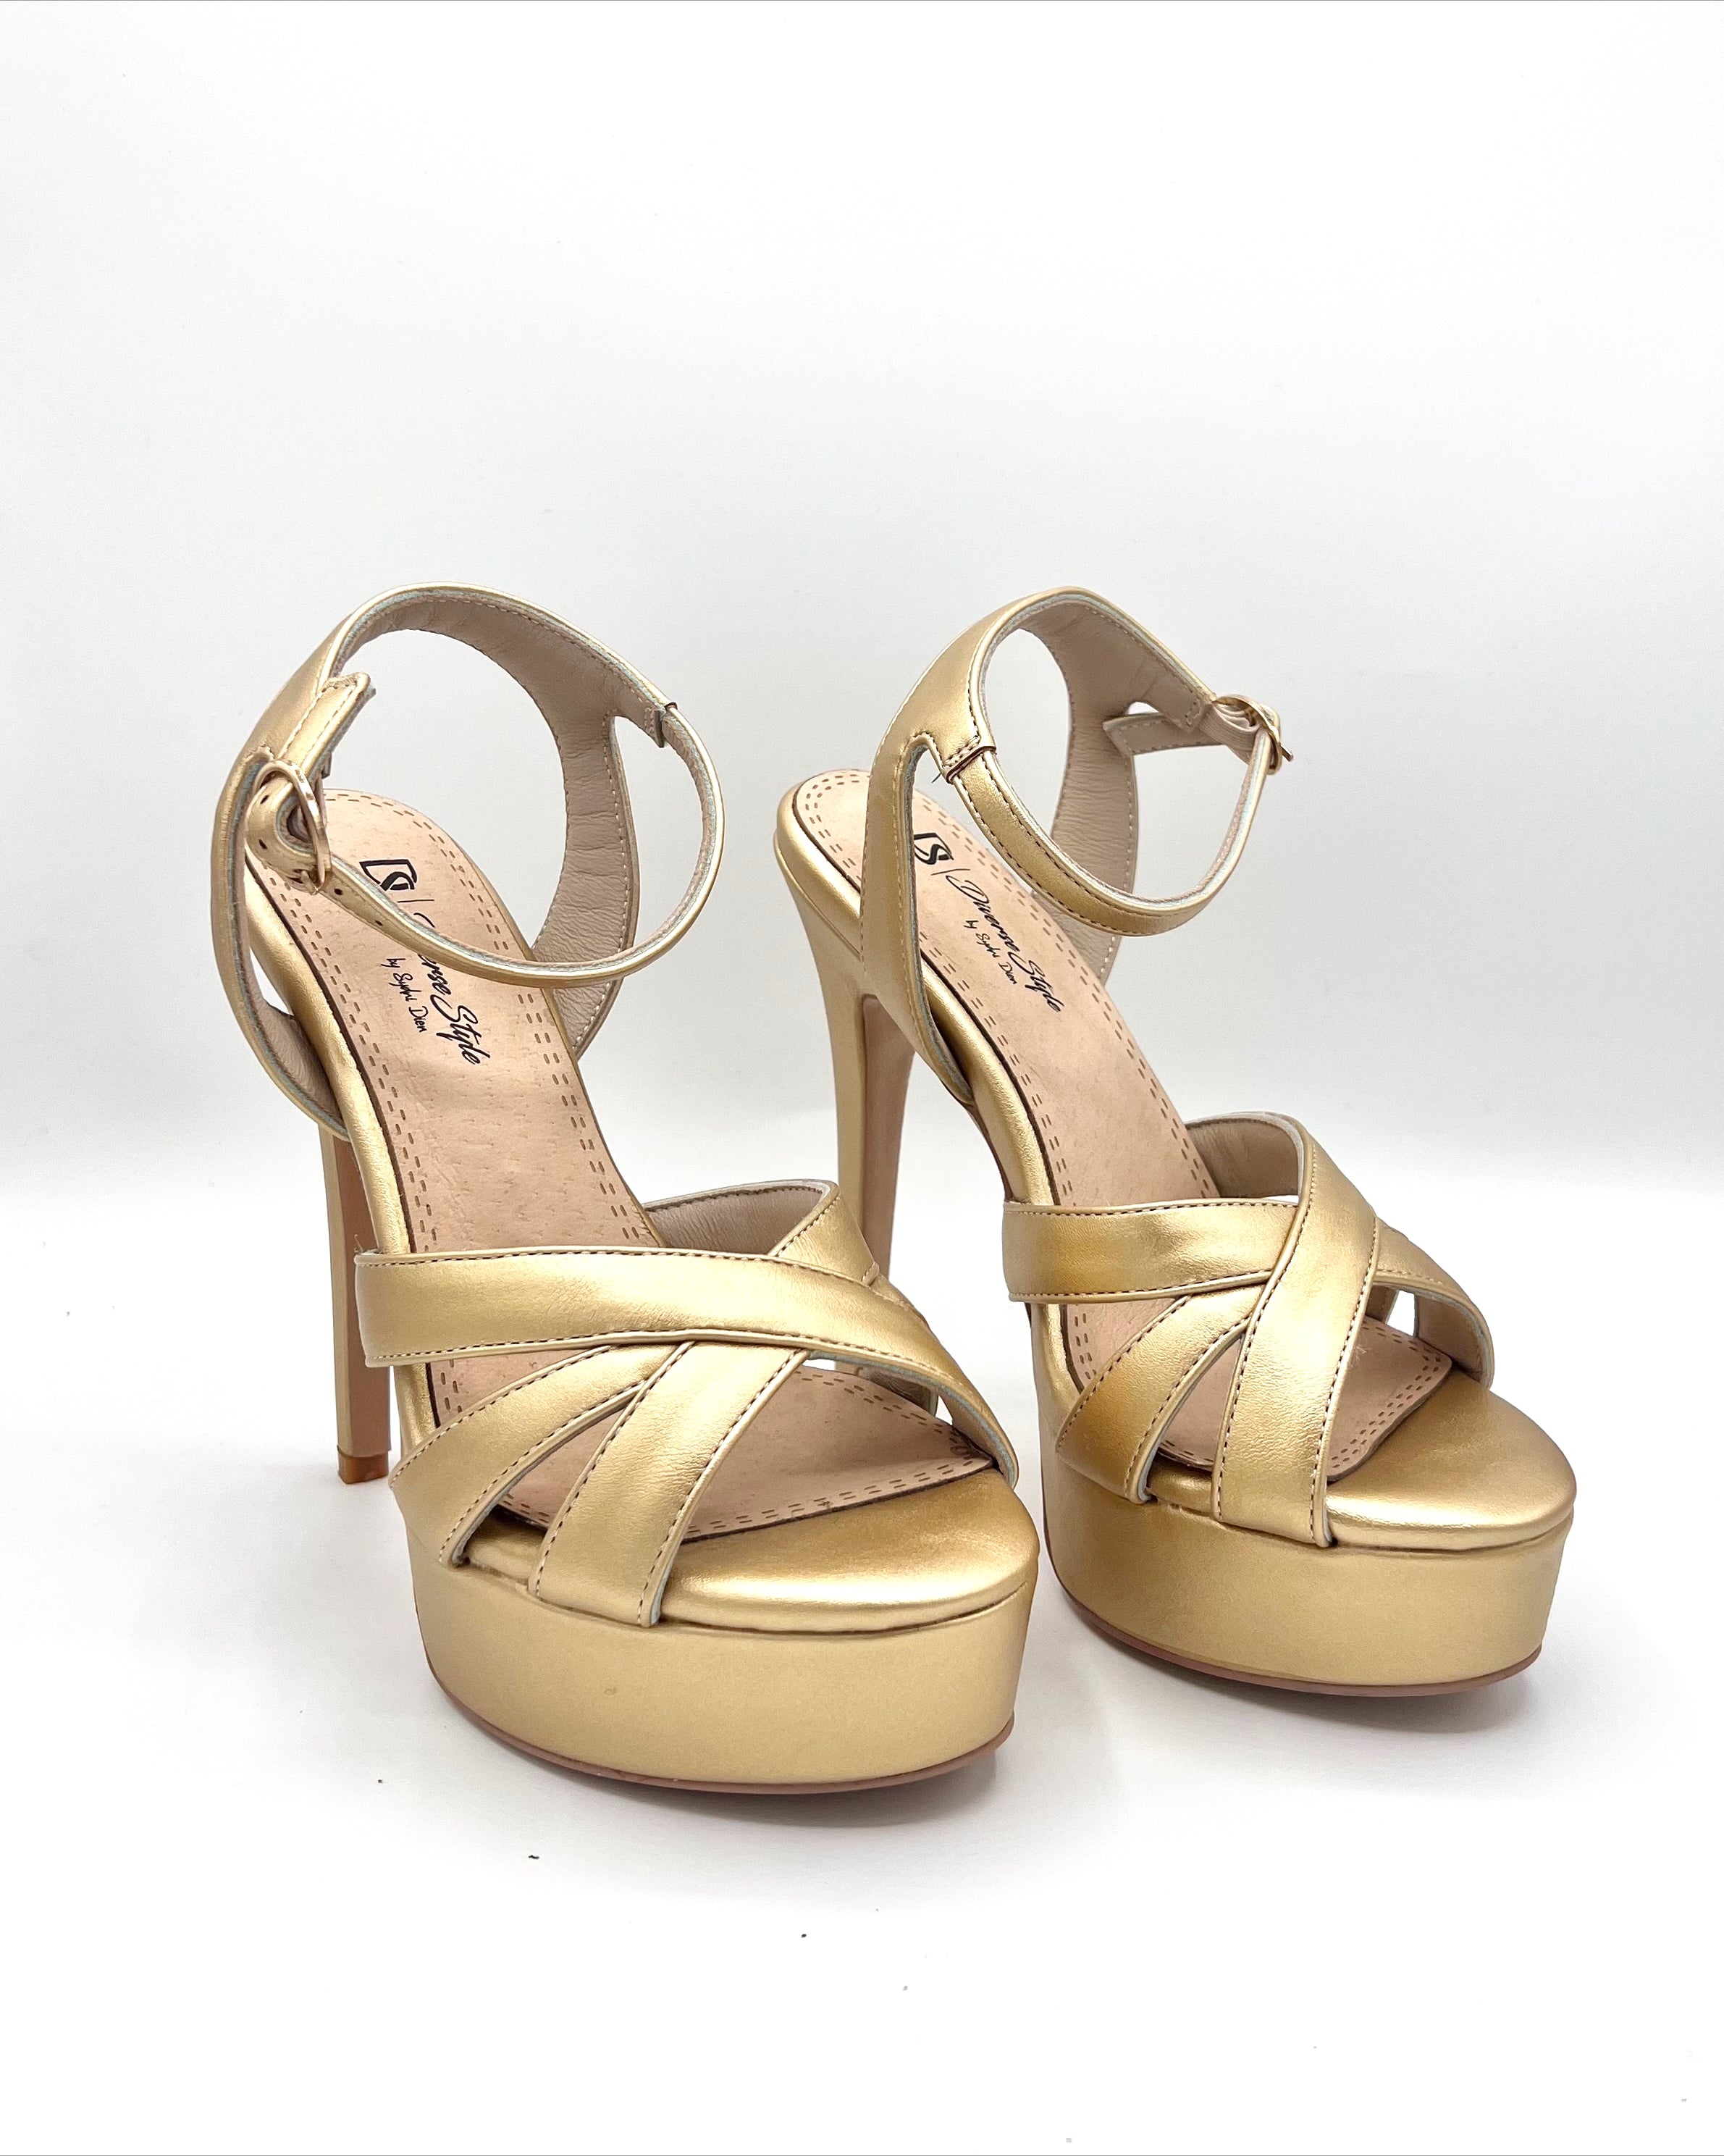 Steve Madden Womens 8.5 Strappy Wedges Yellow Gold 5 inch heels rattan  wedges | eBay